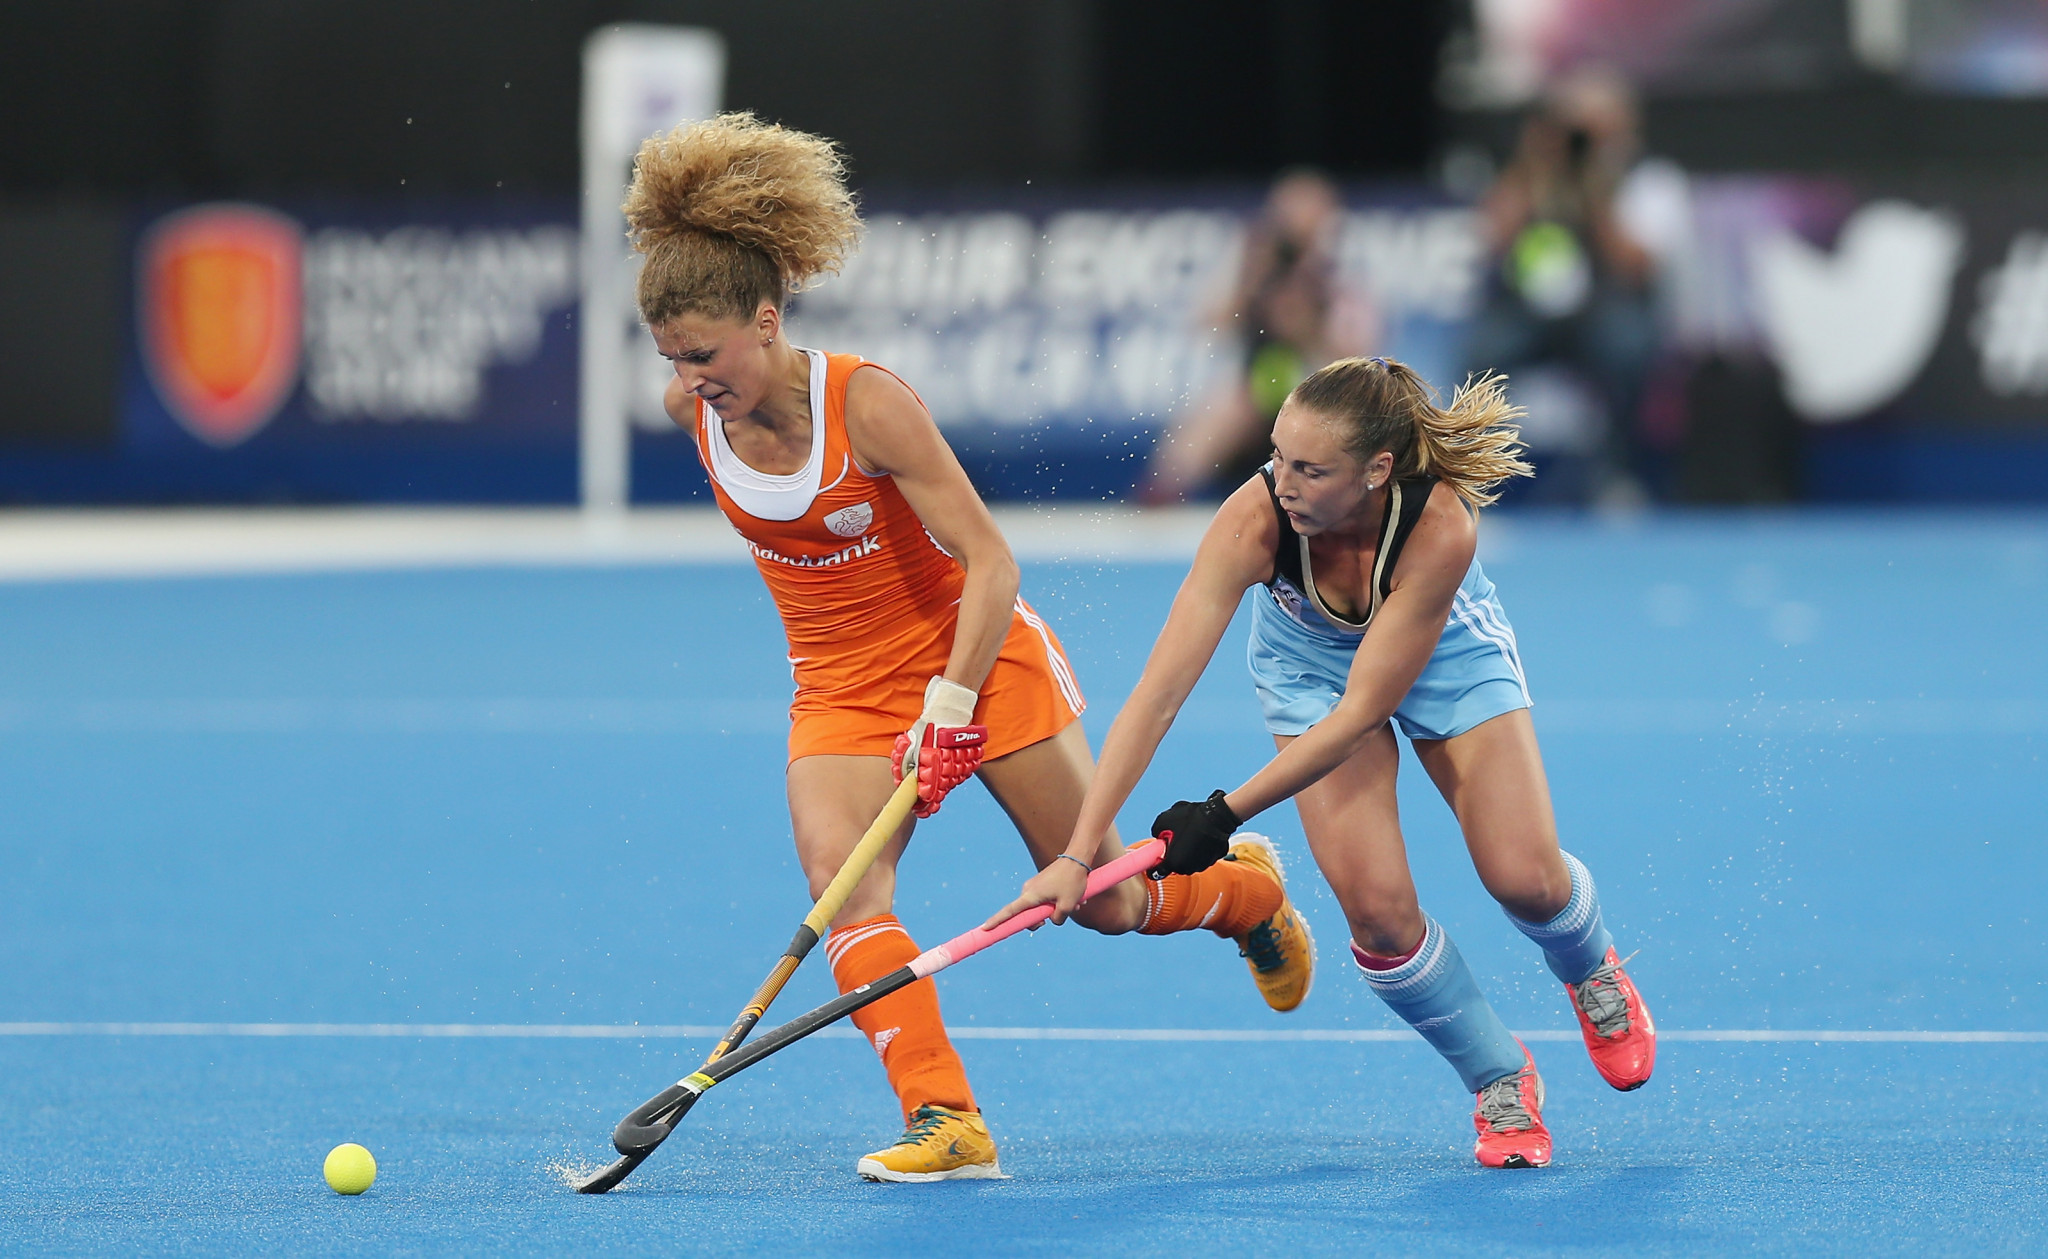 The Netherlands and Argentina are both participating in the 2018 Women's Hockey Champions Trophy which begins tomorrow in China ©Getty Images